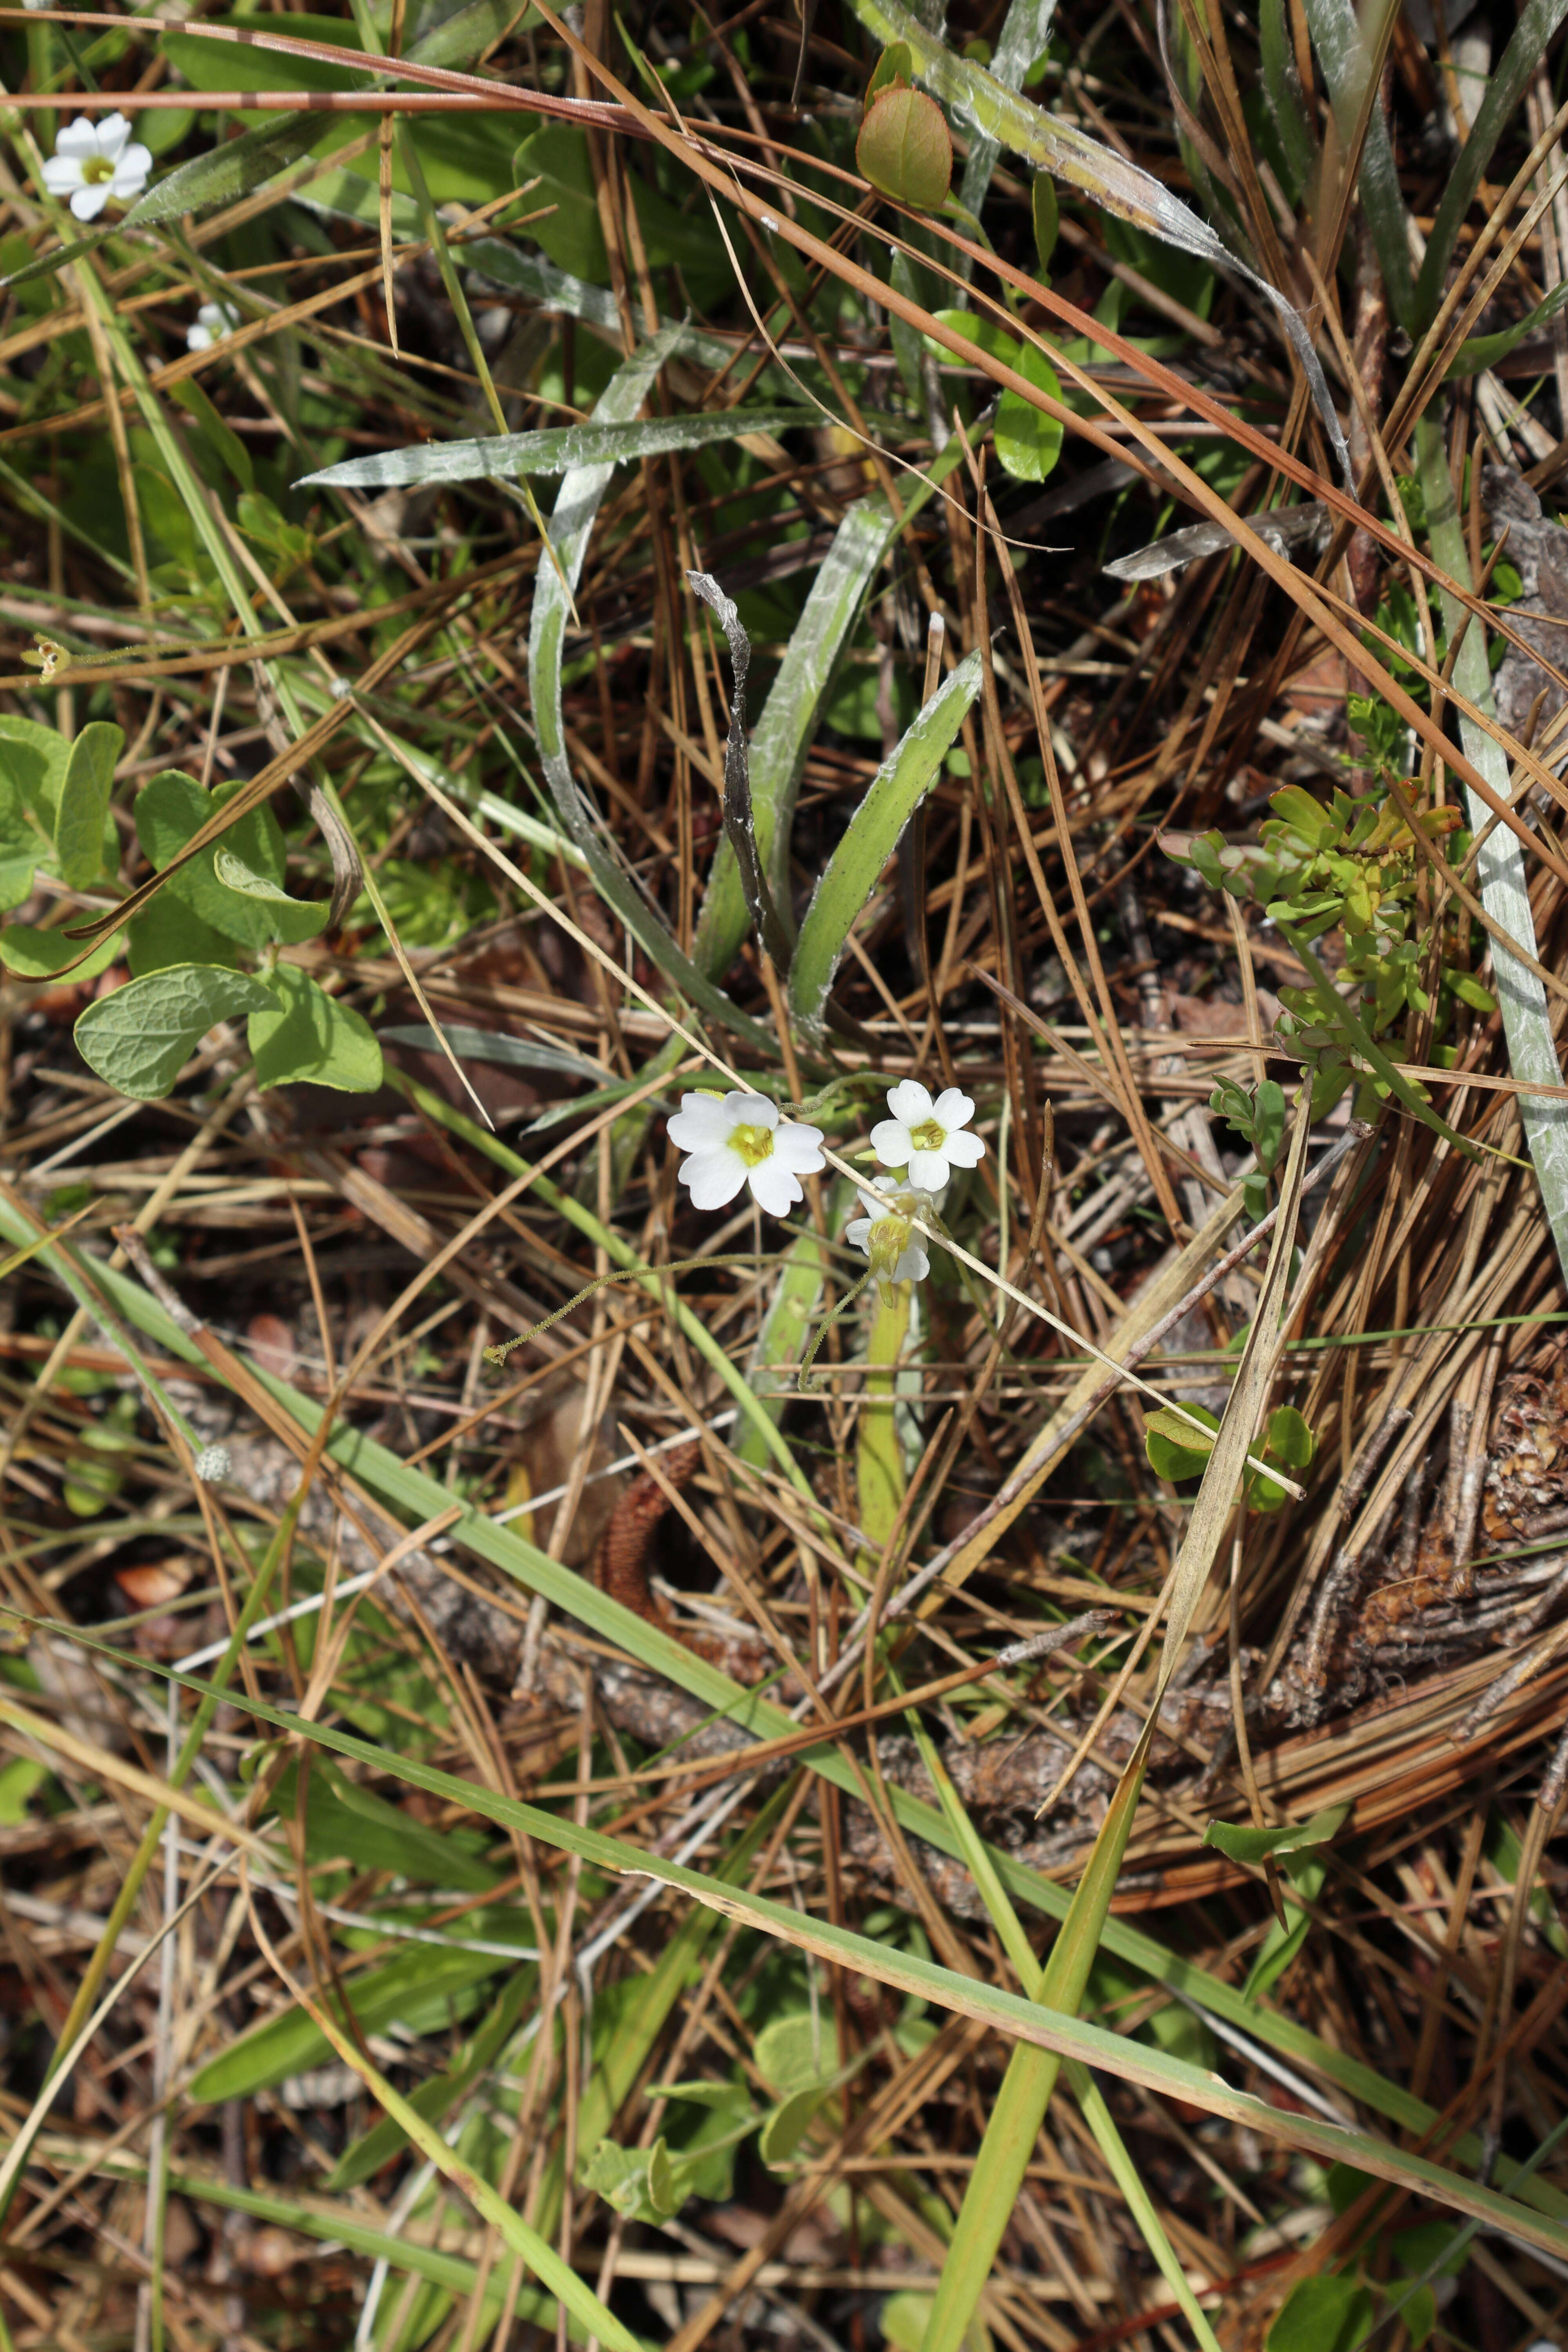 Image of small butterwort